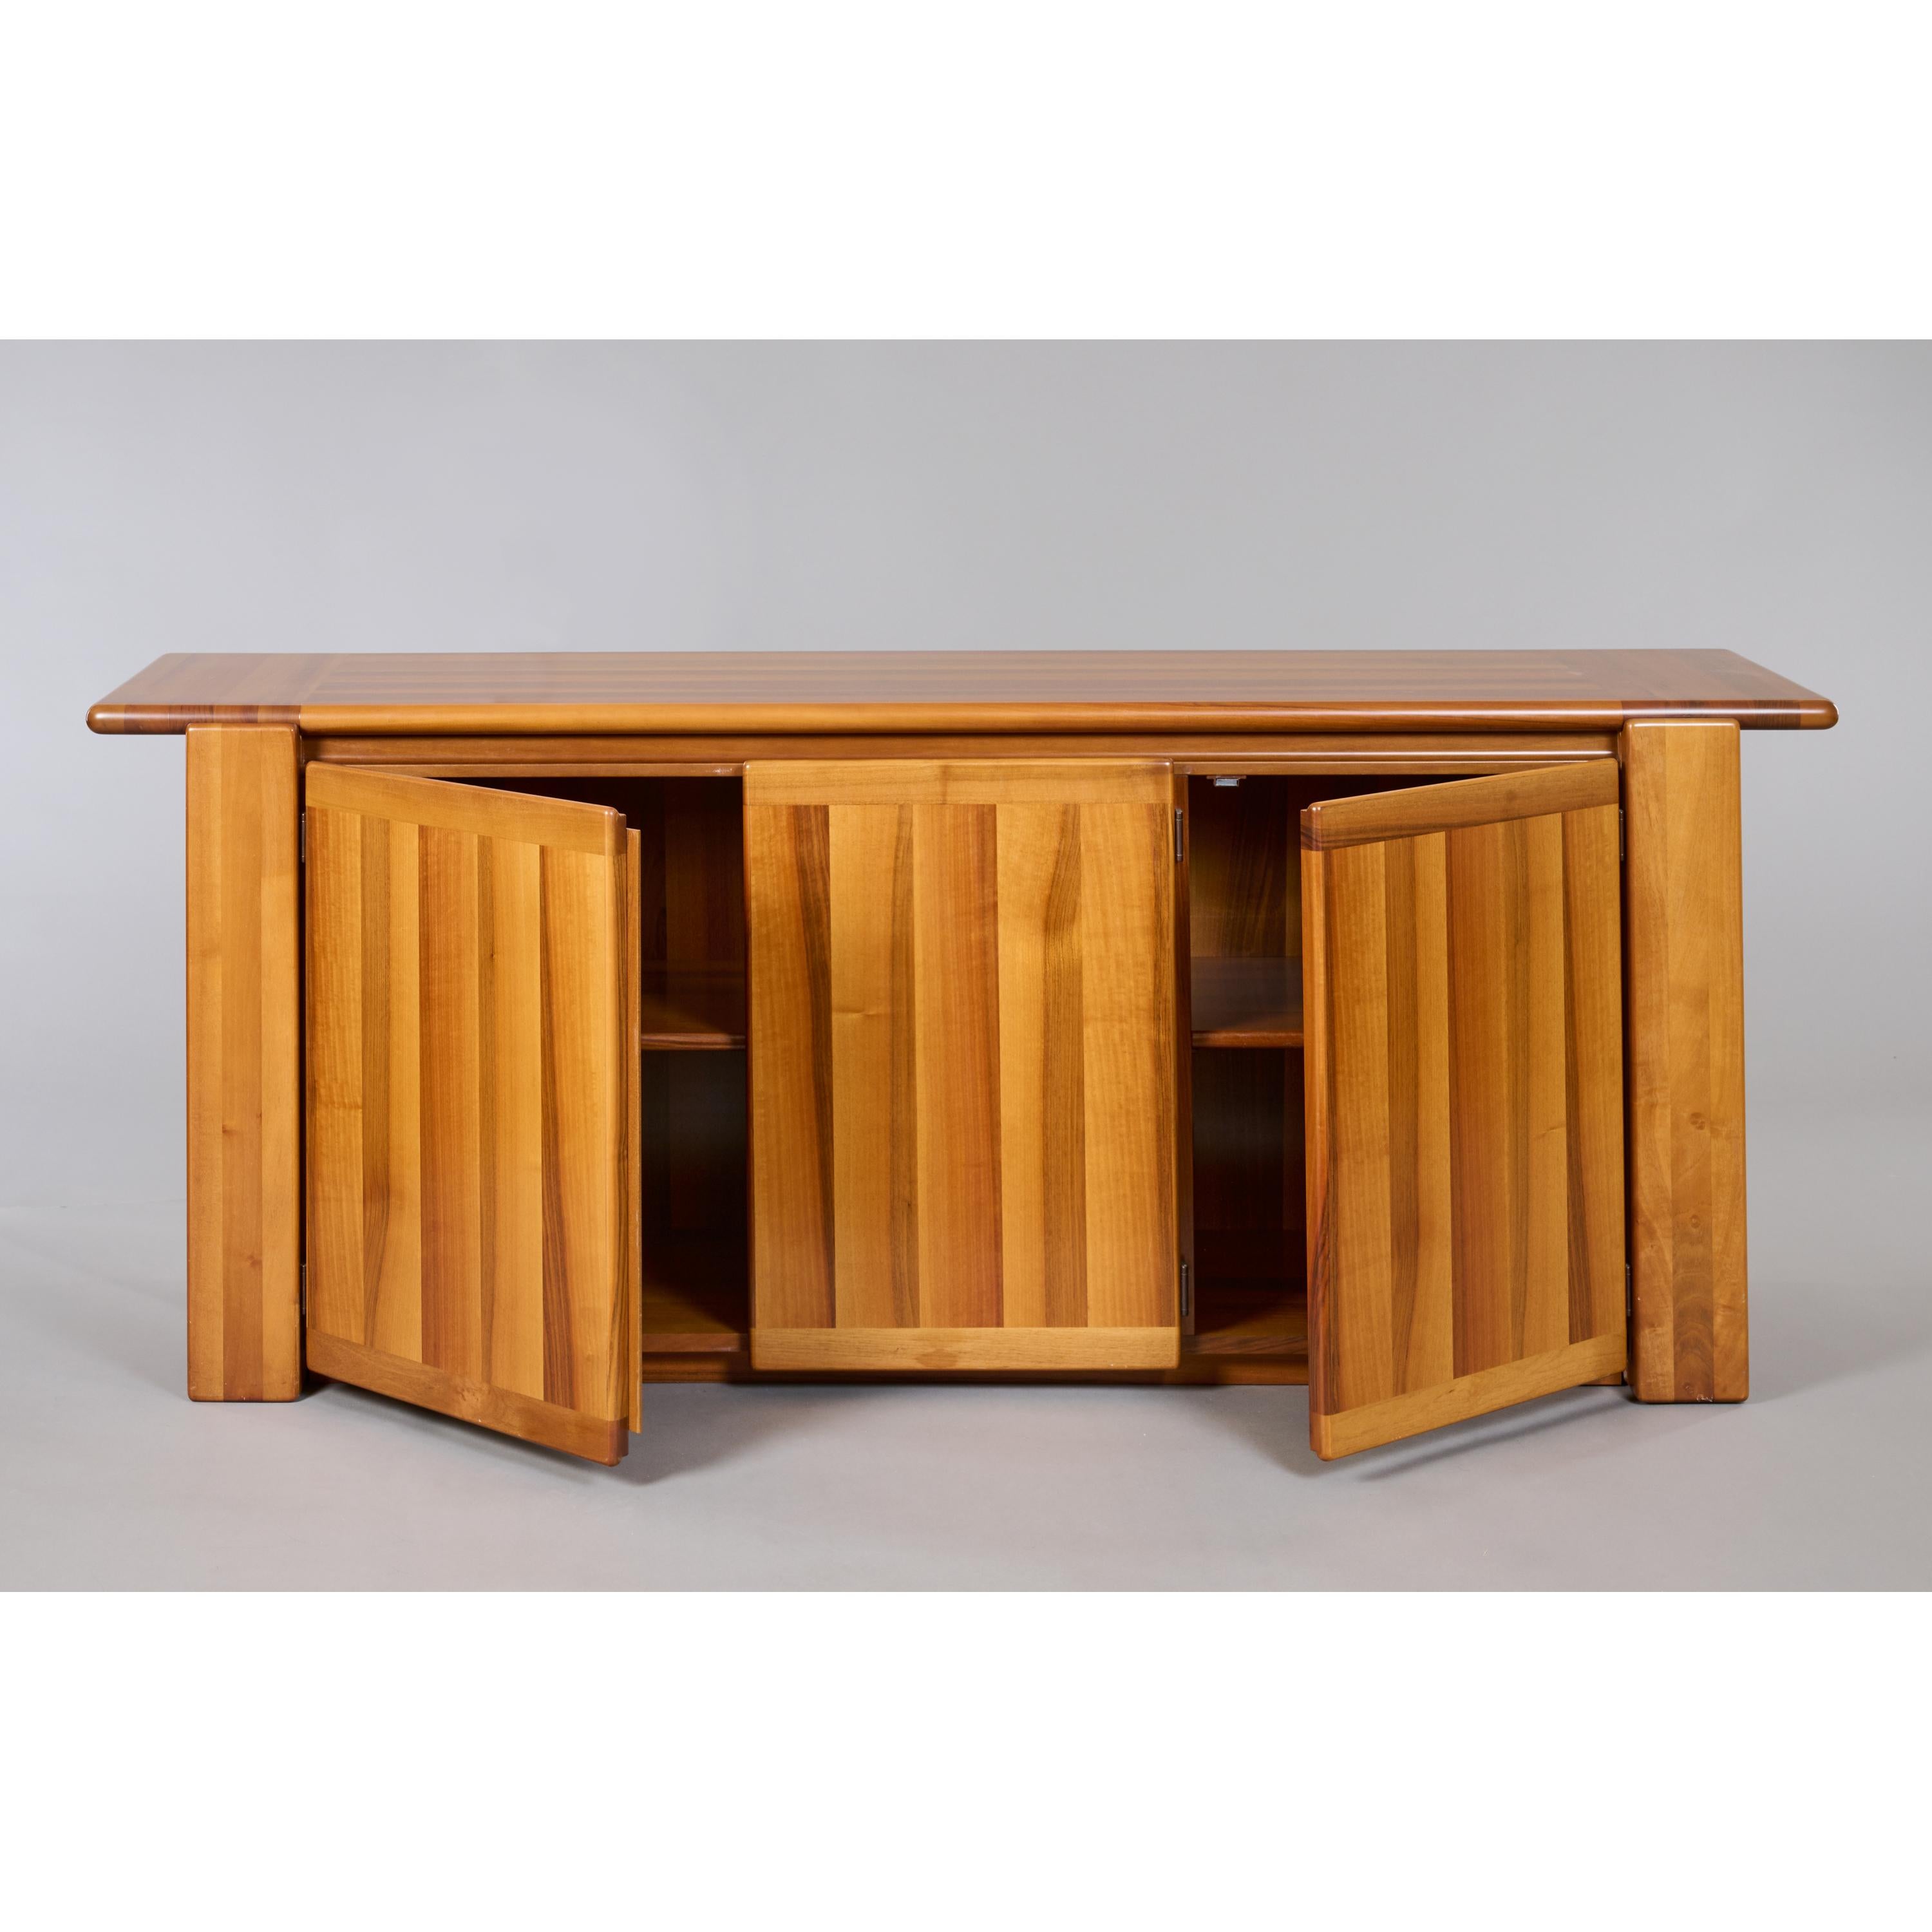 Italian Cabinet in Polished Walnut, Itso Pierre Chapo, Italy 1970s For Sale 2